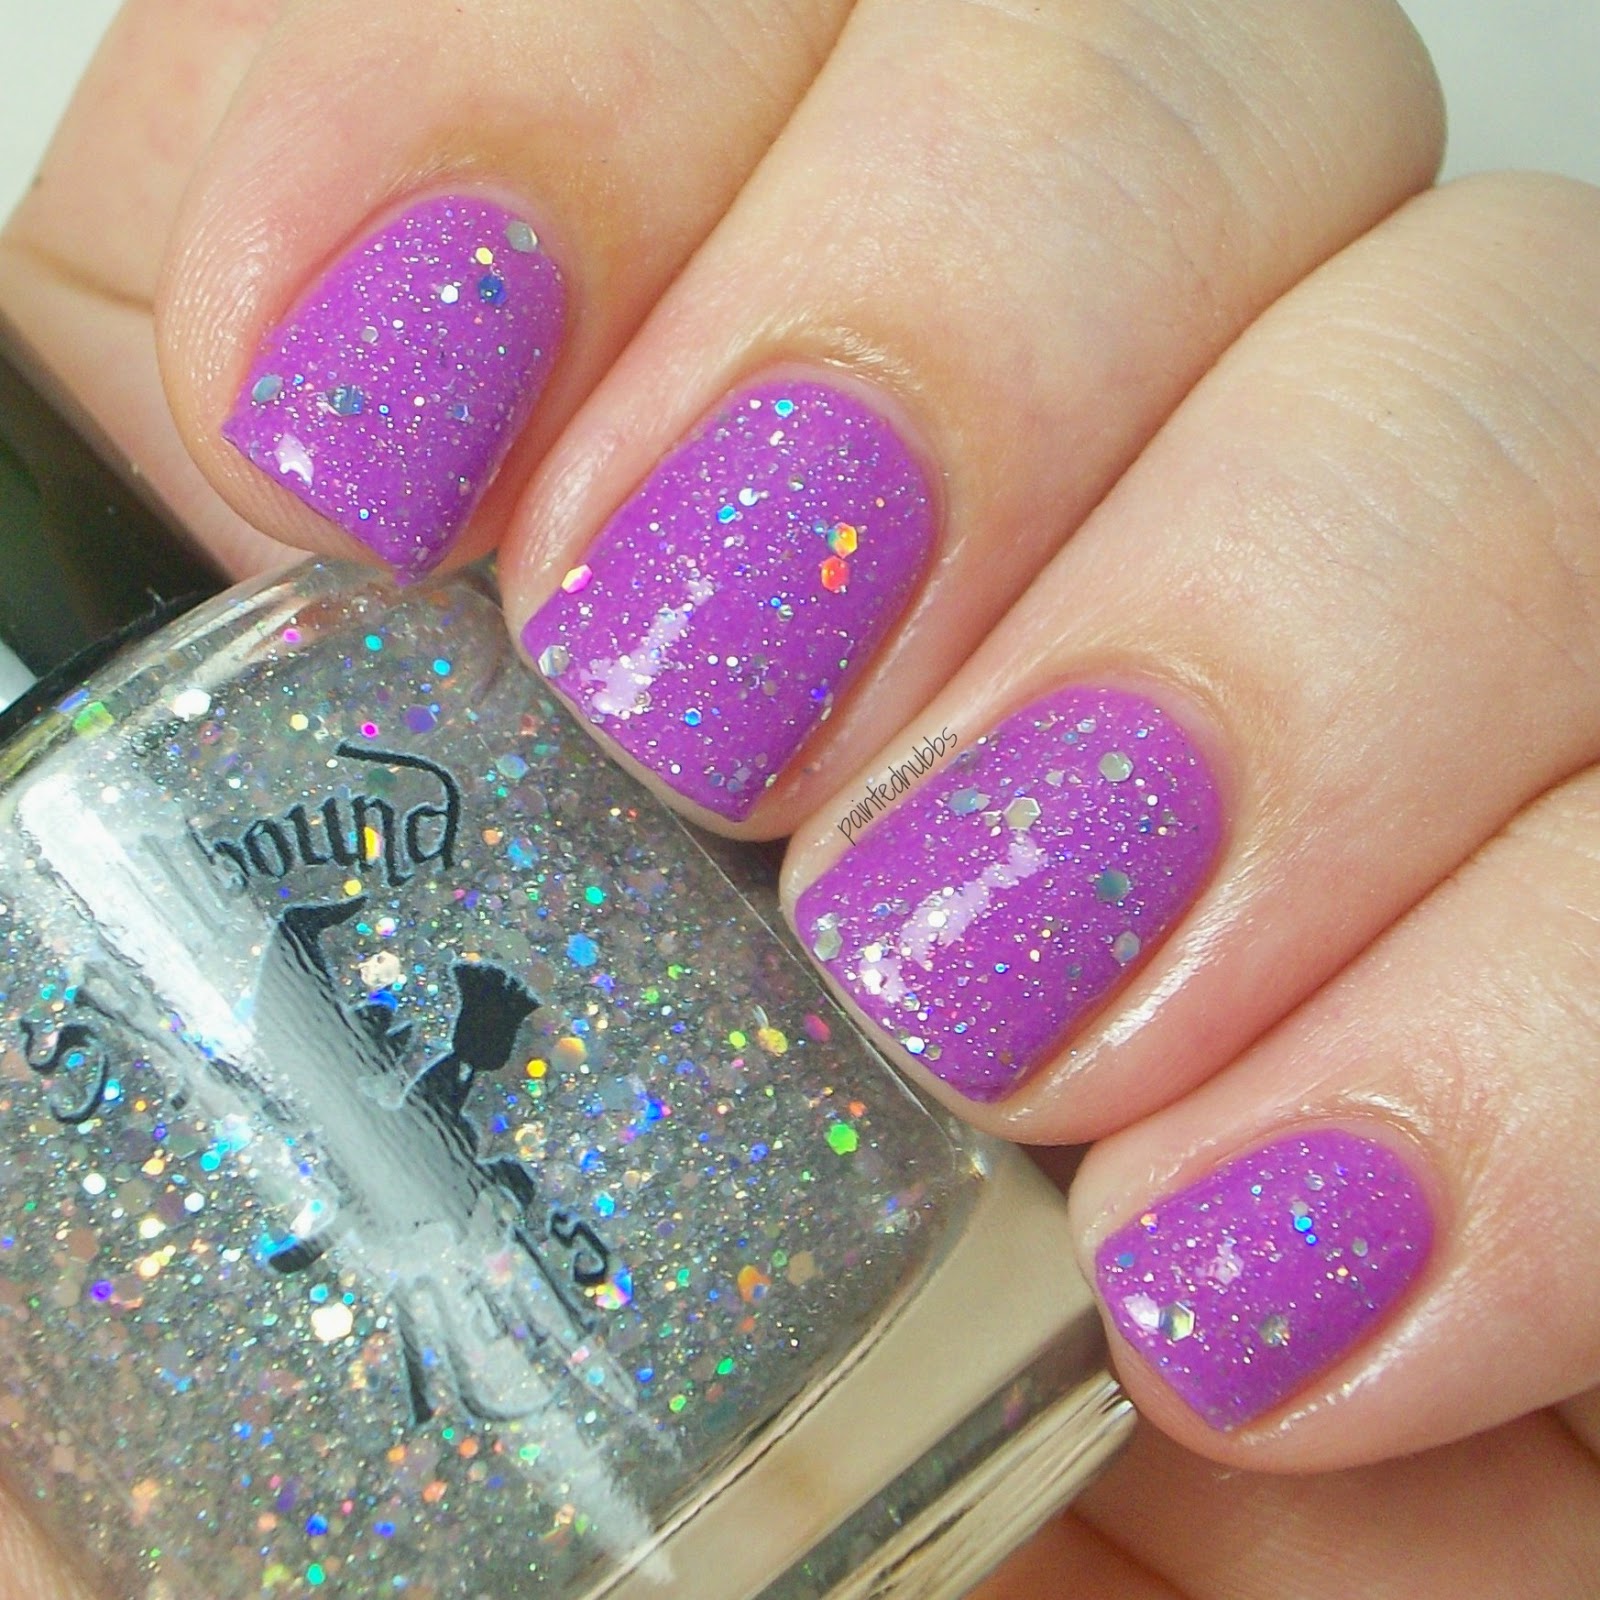 Painted Nubbs: Spellbound Nails at Gloss48